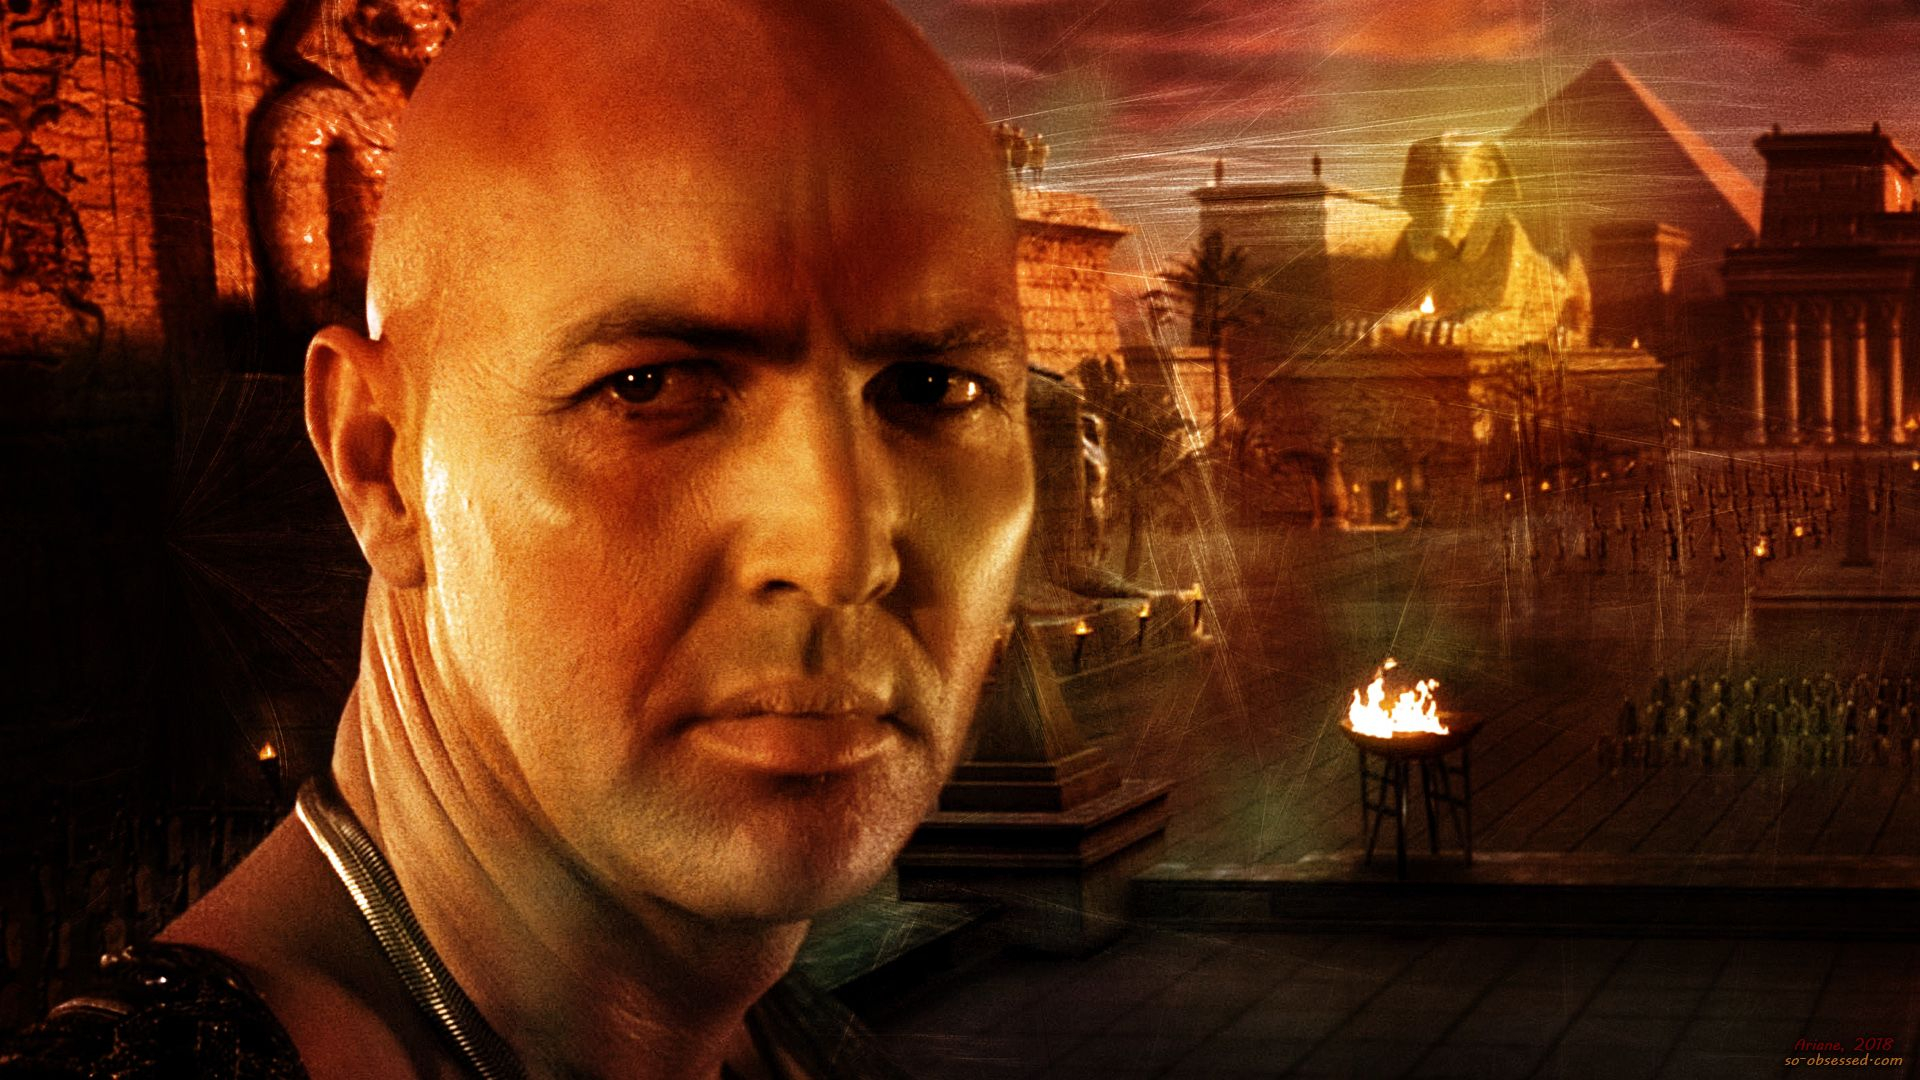 1920x1080 The Mummy, Imhotep, Arnold Vosloo wallpaper | Imhotep the mummy, Lost girl, Mummy